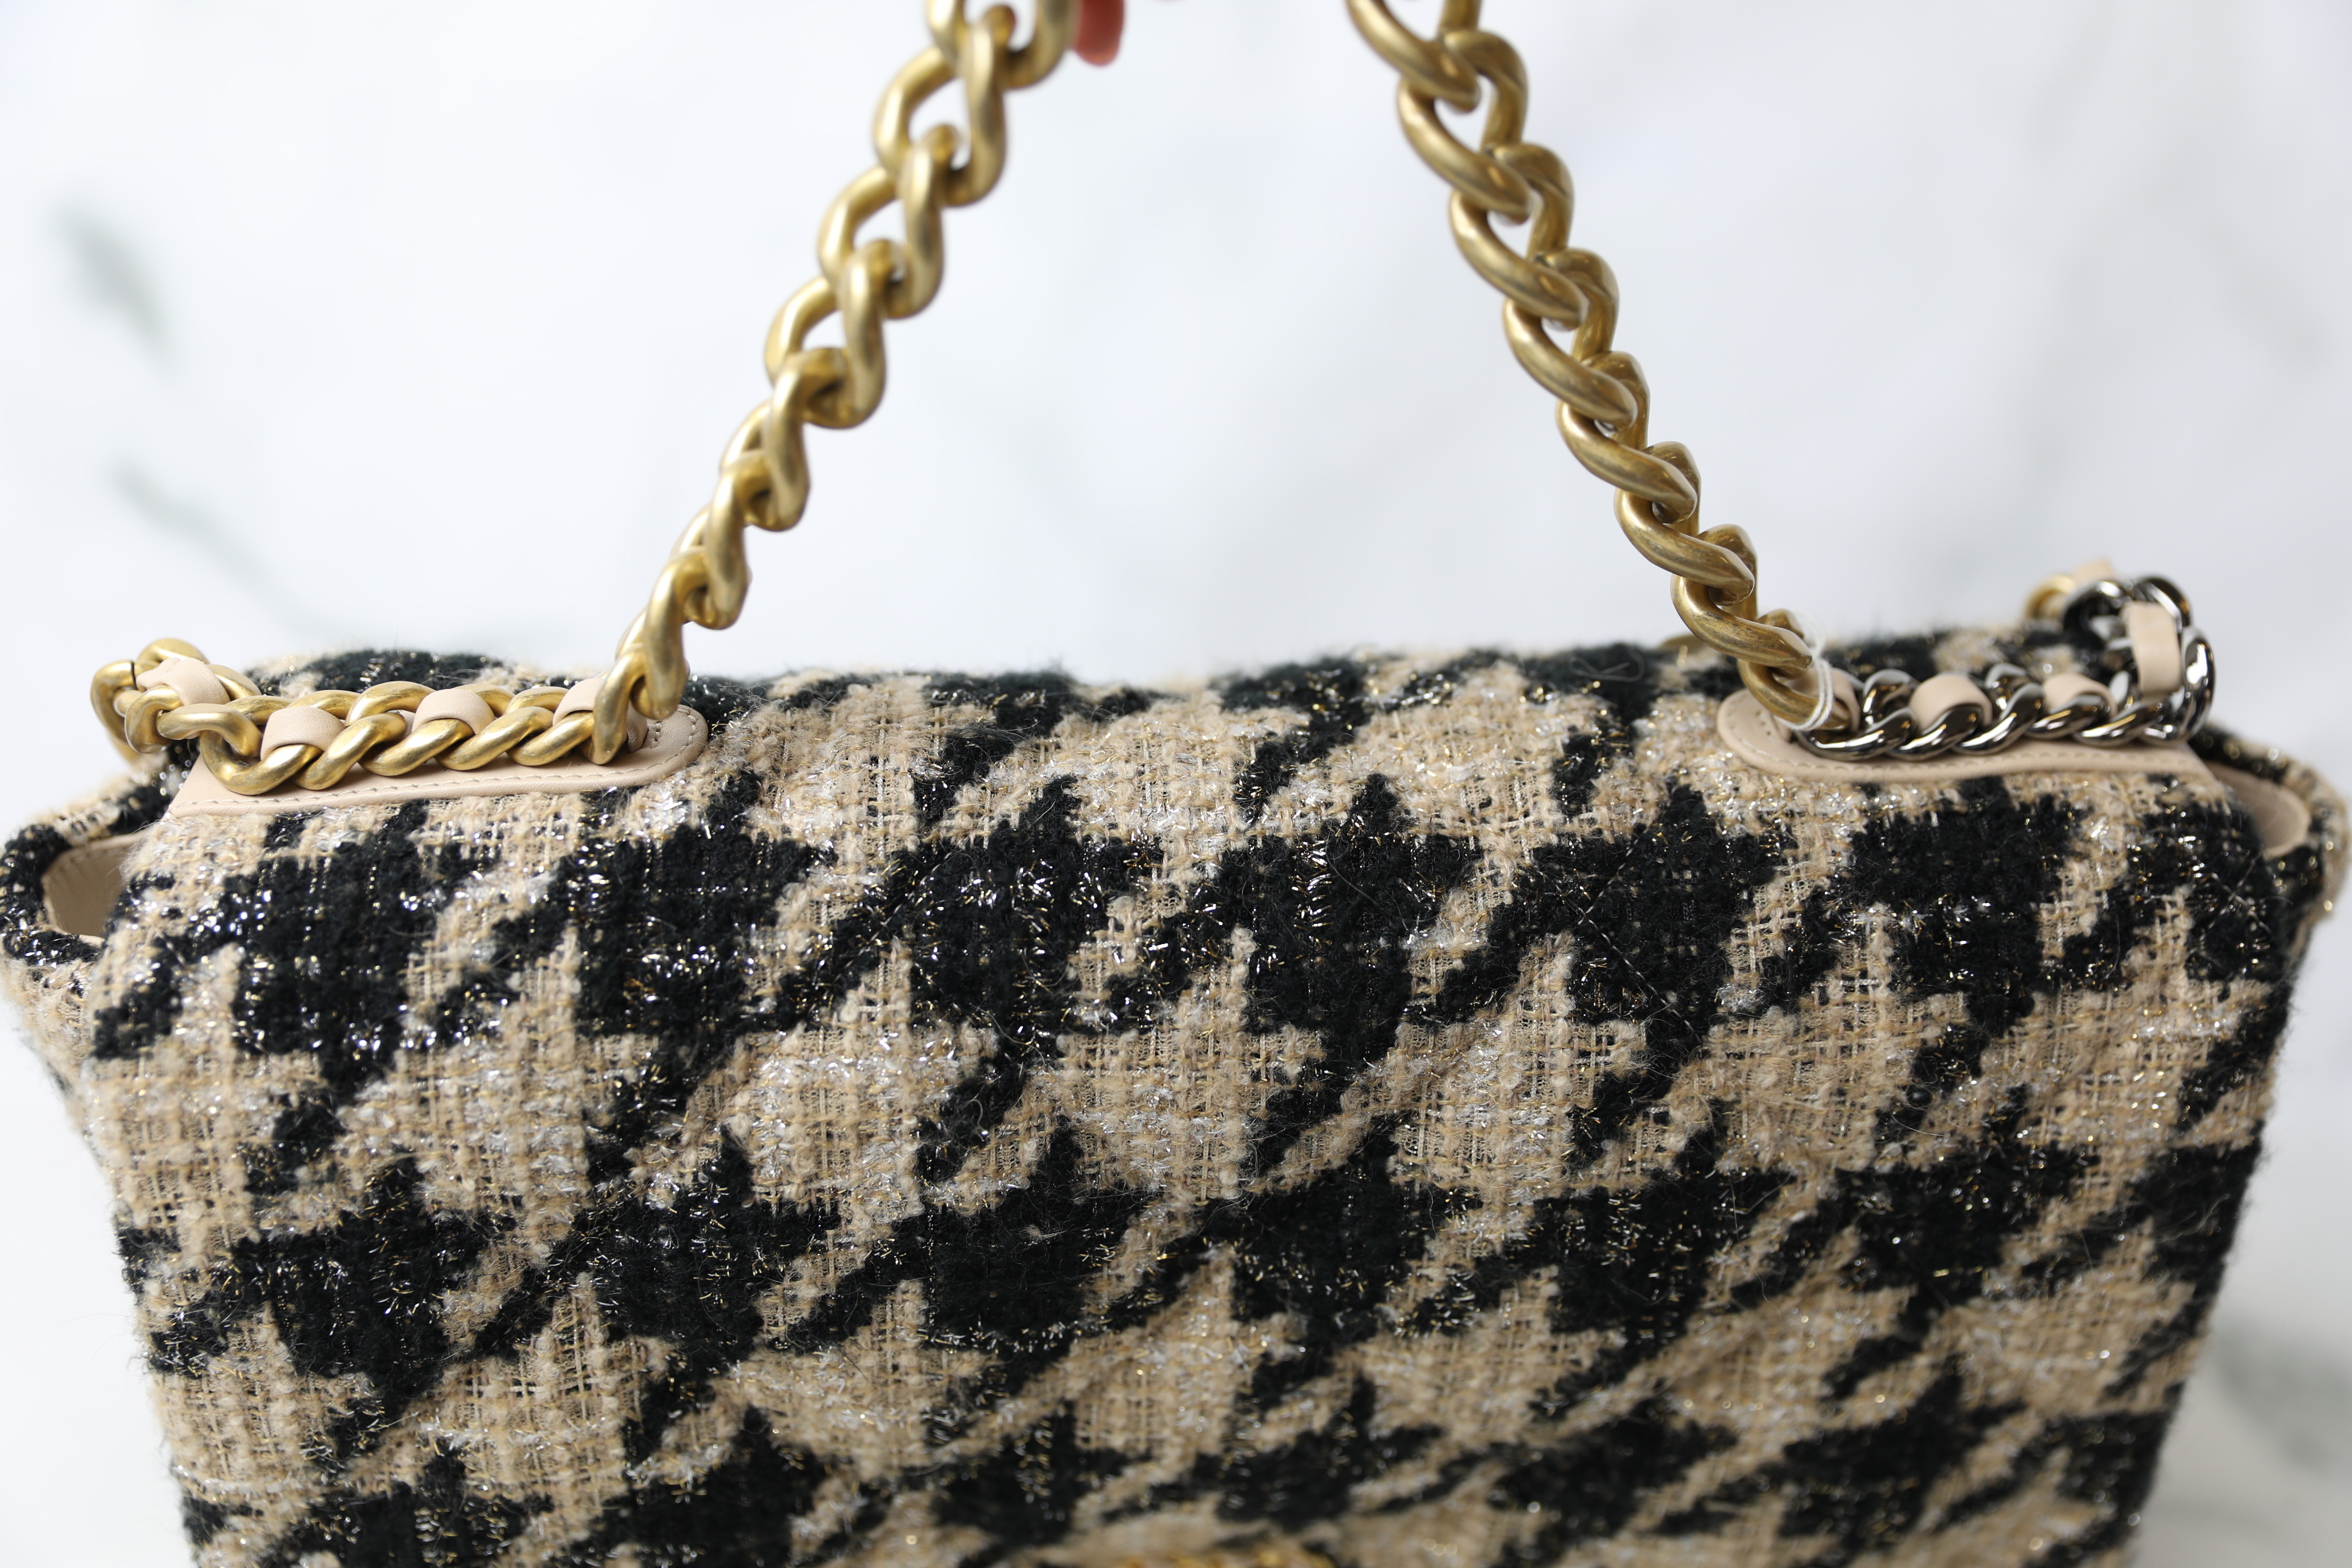 Chanel 19 Small, Beige and Black Houndstooth Tweed, Preowned in Dustbag  WA001